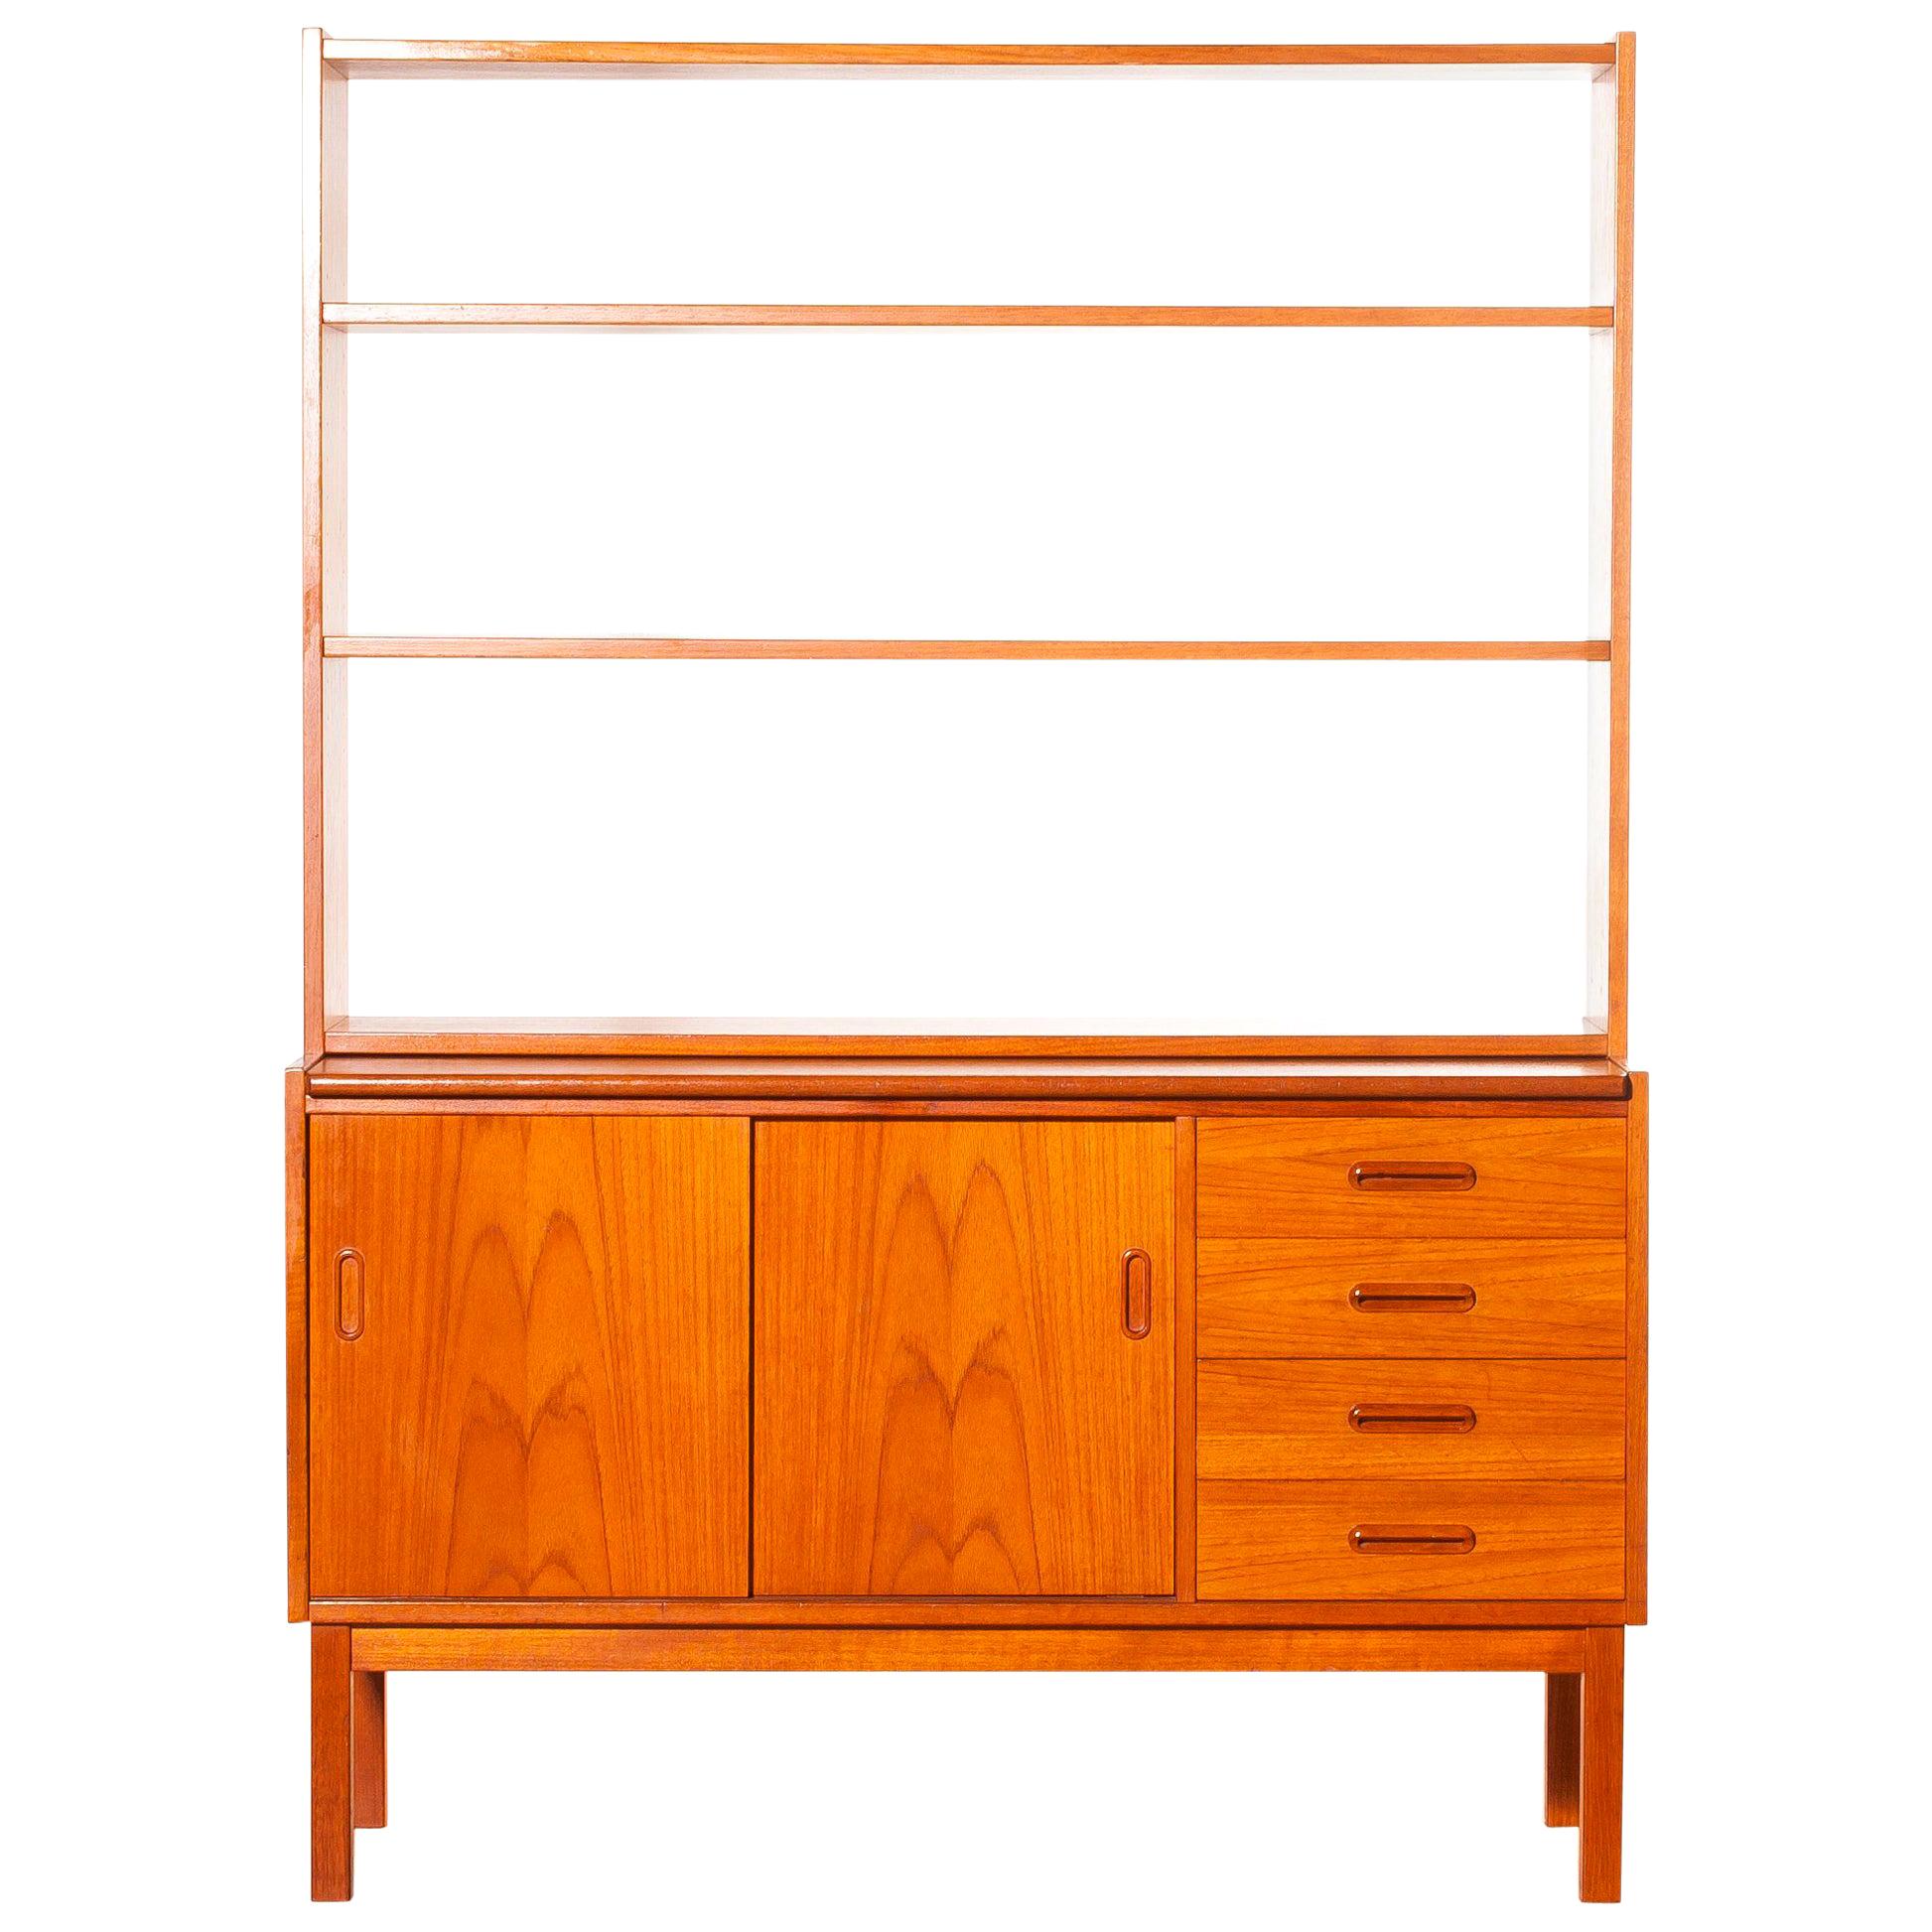 Mid-20th Century 1960s, Teak Bookcase with Slid Able Writing or Working Space from Sweden